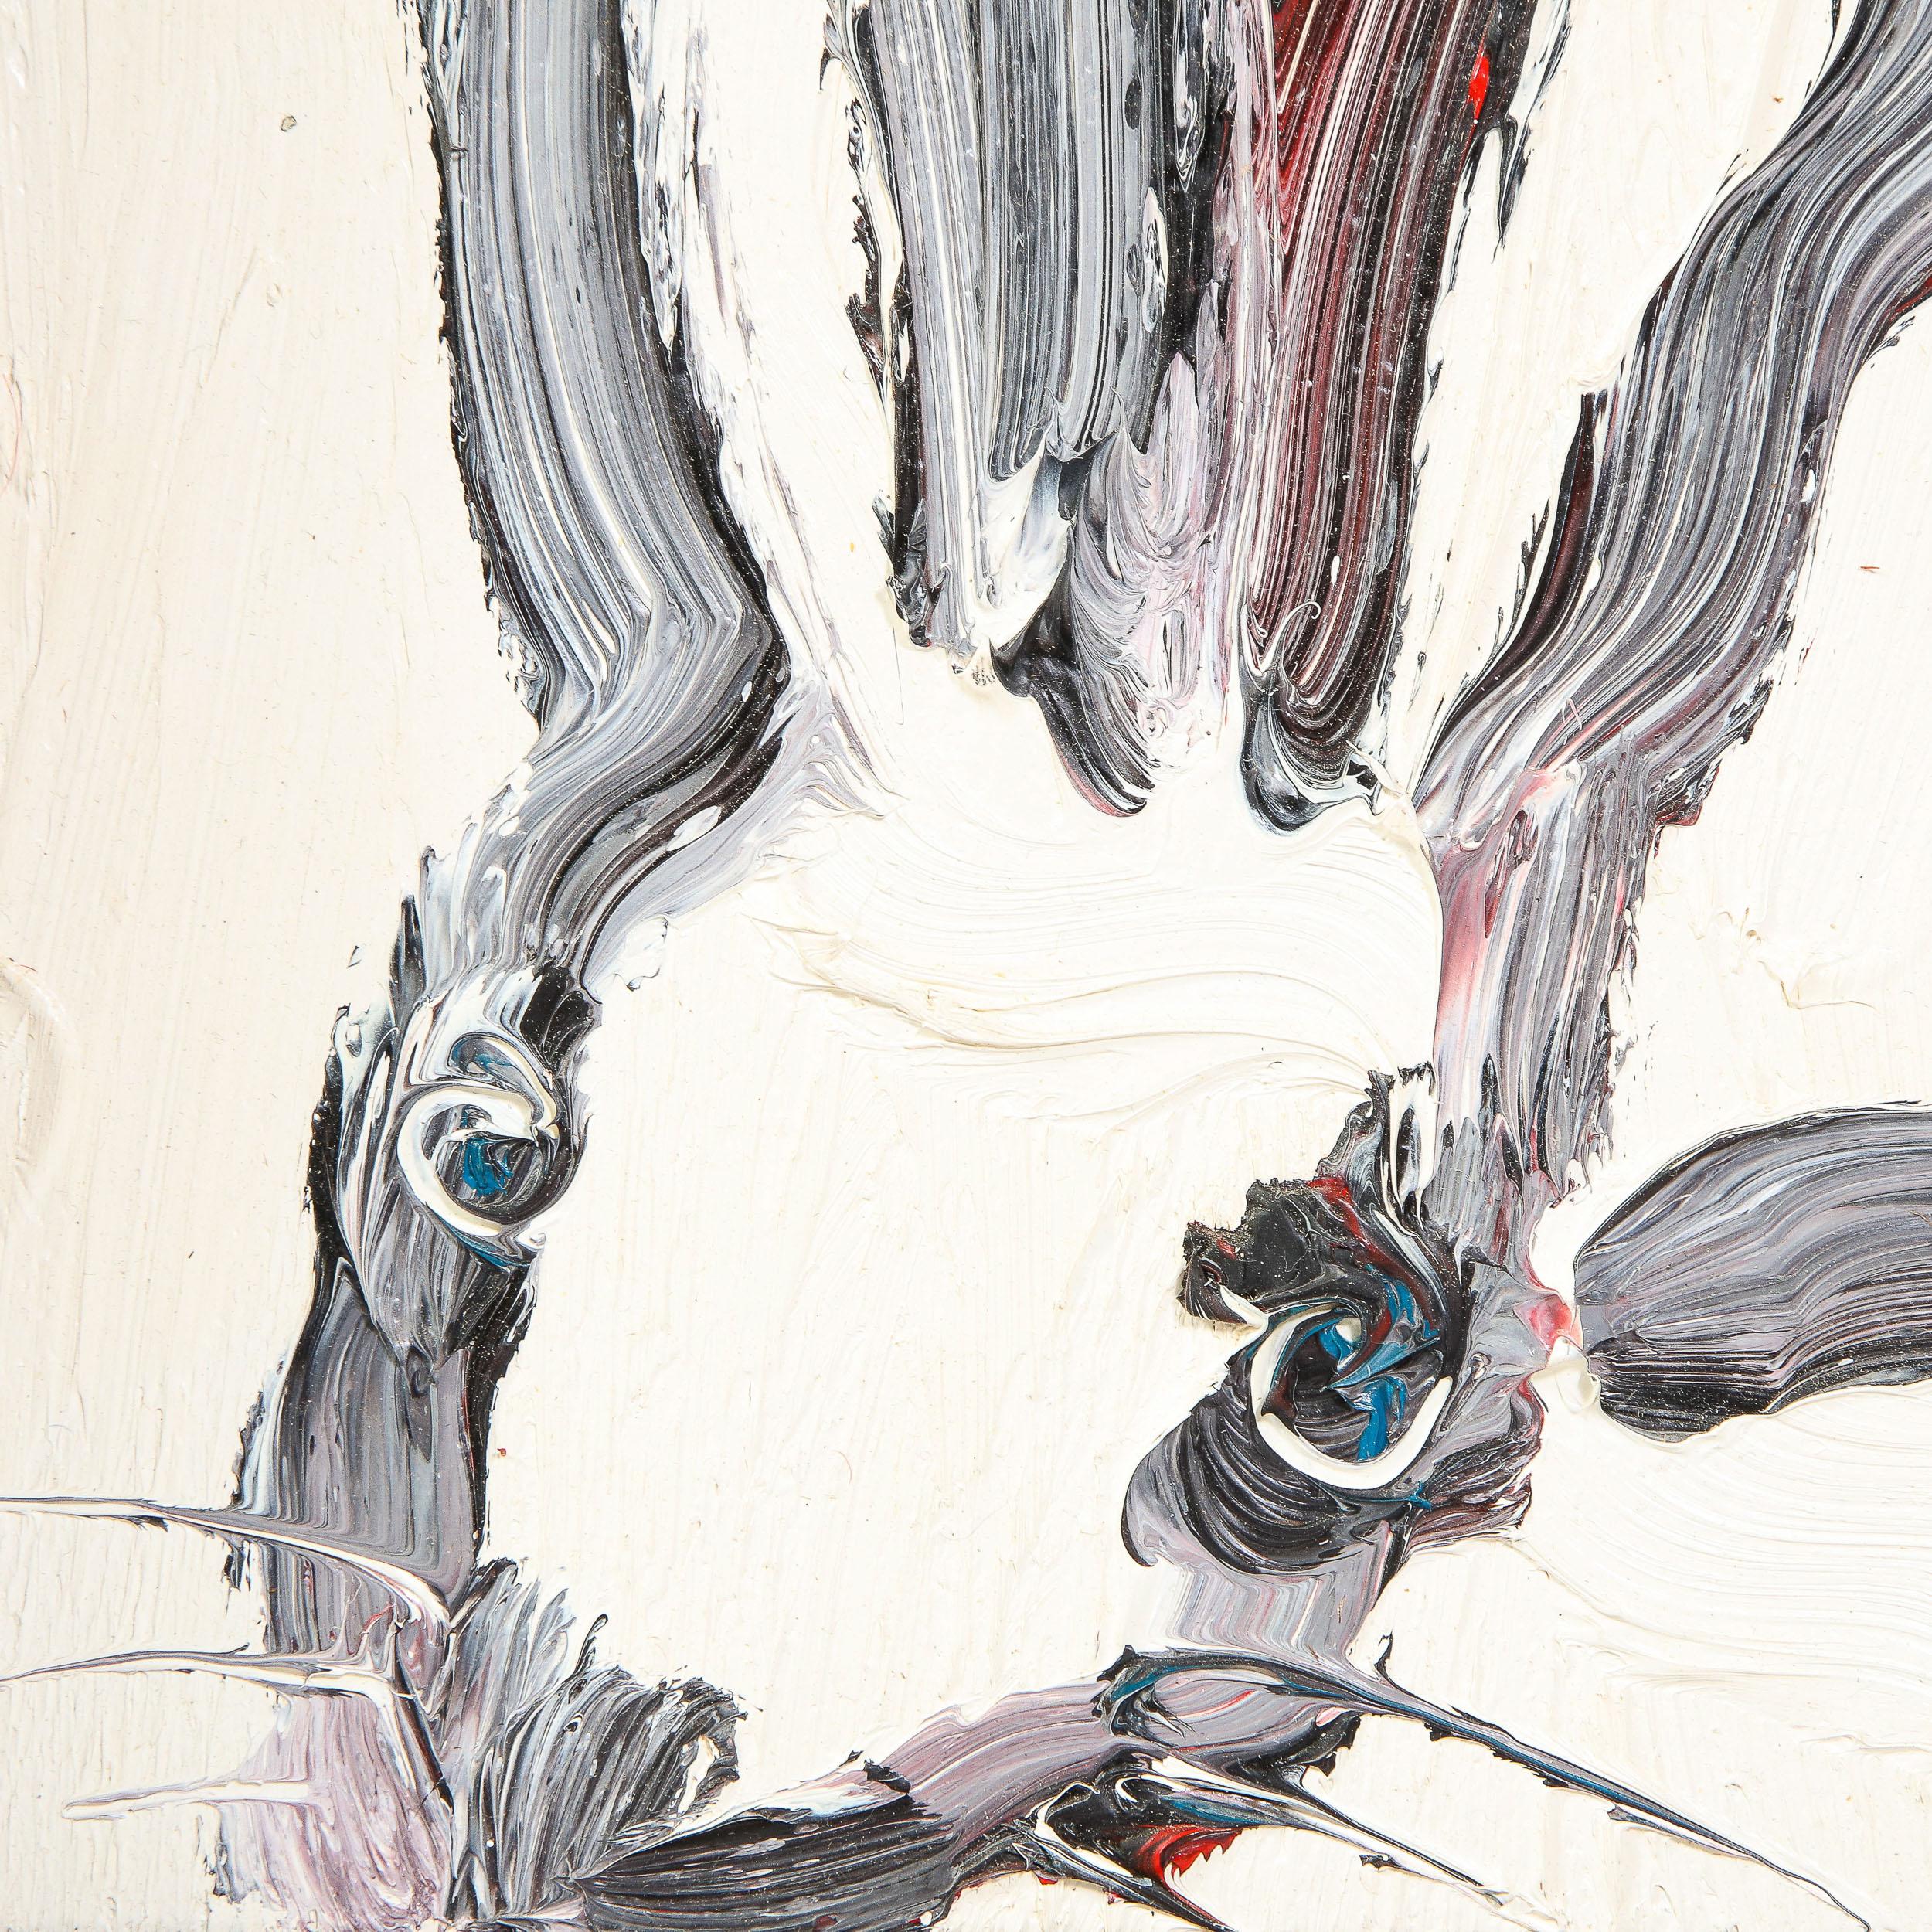 This whimsical and sophisticated painting was realized by the esteemed contemporary painter, Hunt Slonem in 2015. It presents a stylized bunny rabbit, rendered with loose and expressive brush strokes in black and white paint (with hints of carnelian